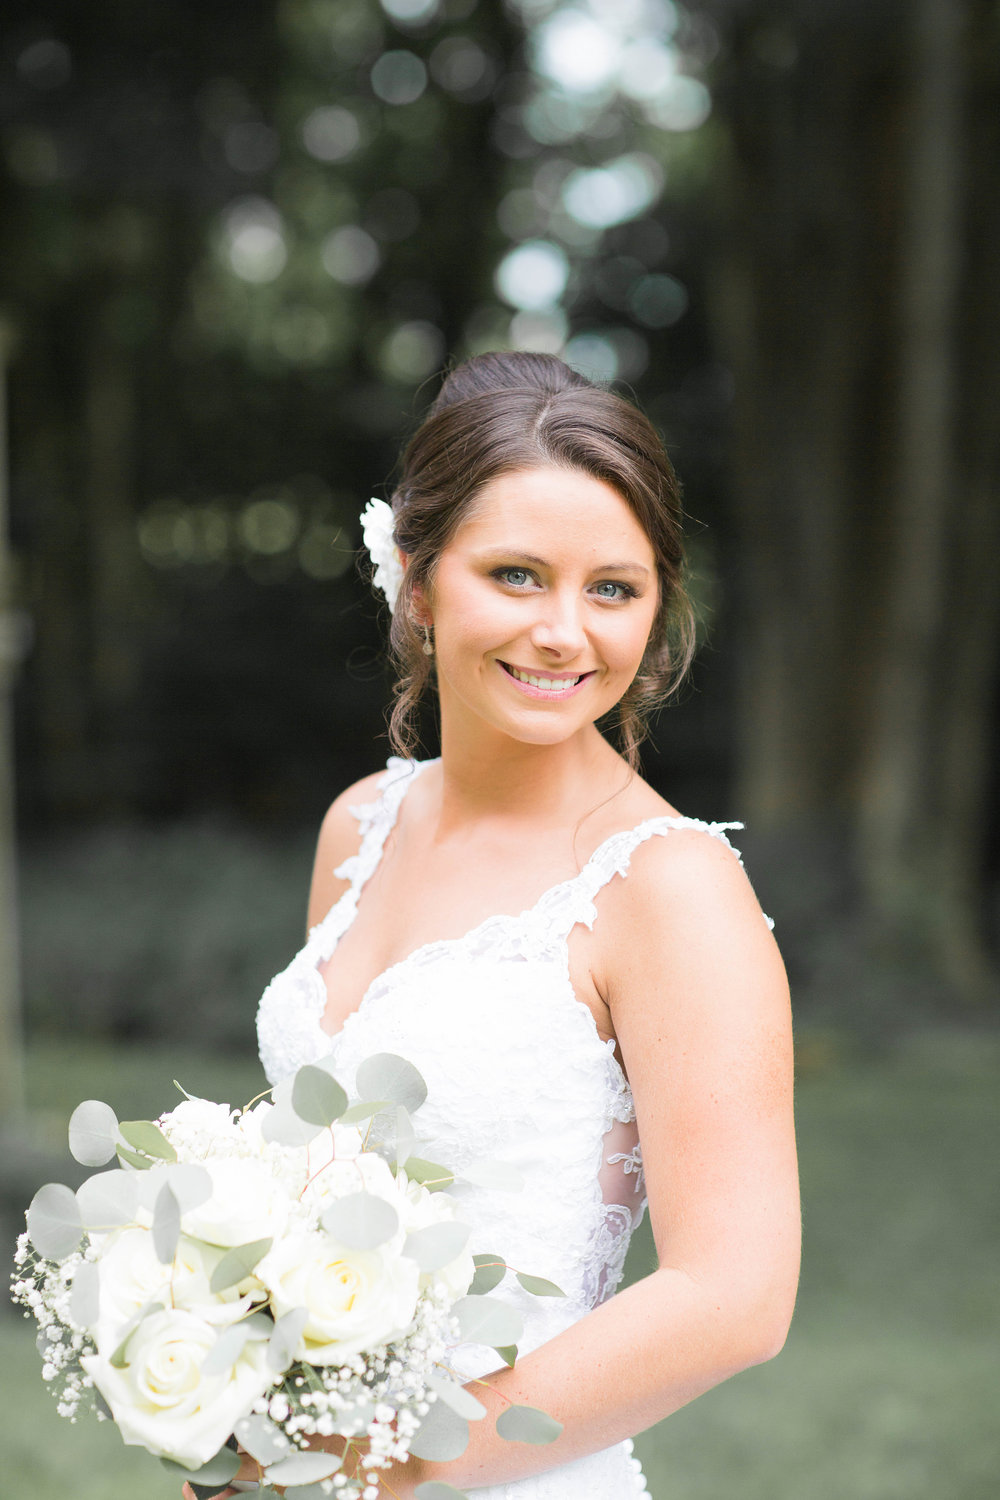  How'd I get so blessed to shoot such a beautiful bride?! 